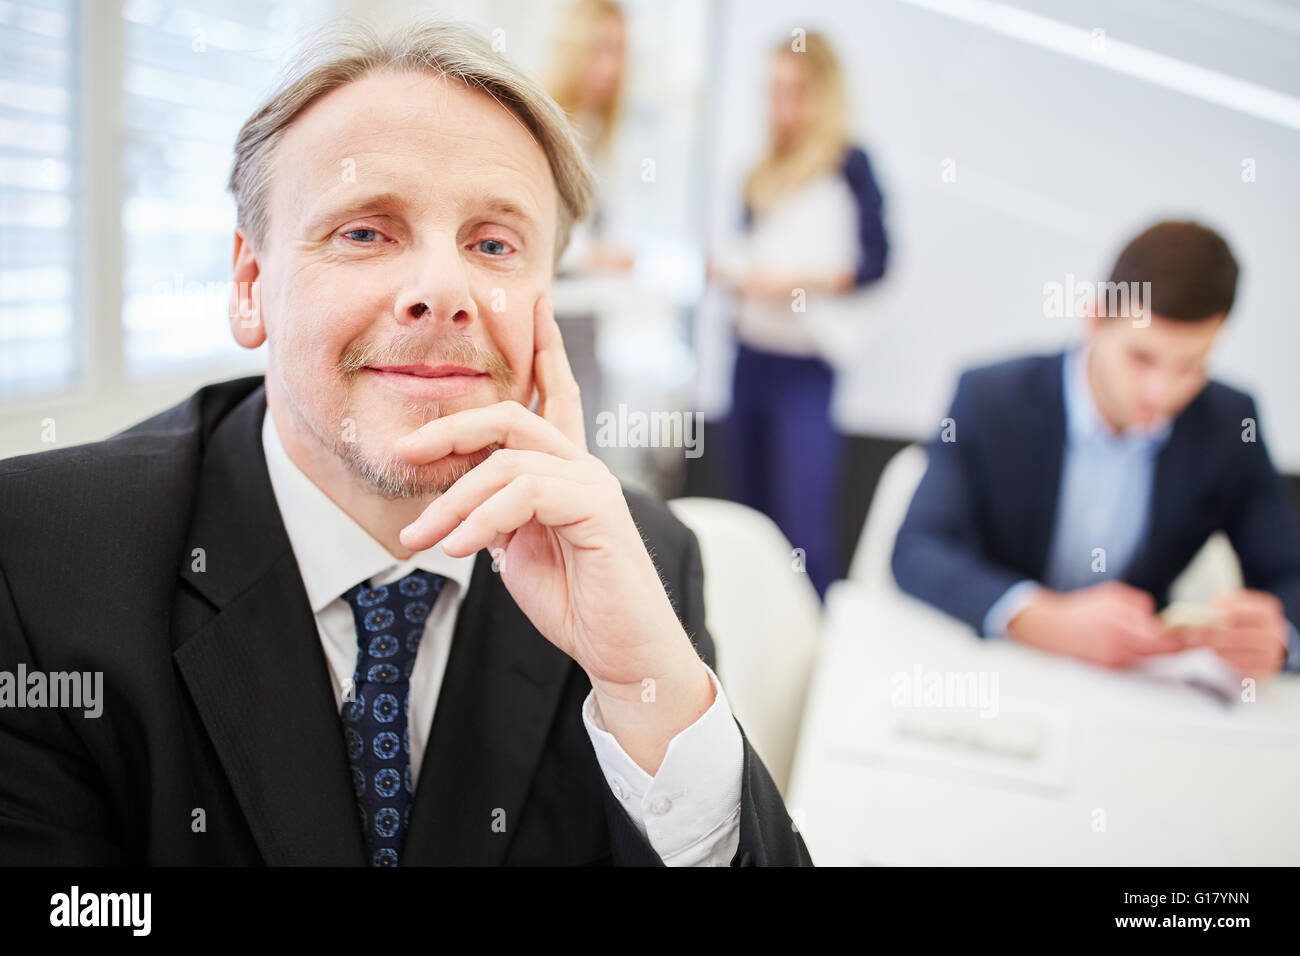 Old businessman as CEO with competence and leadership Stock Photo